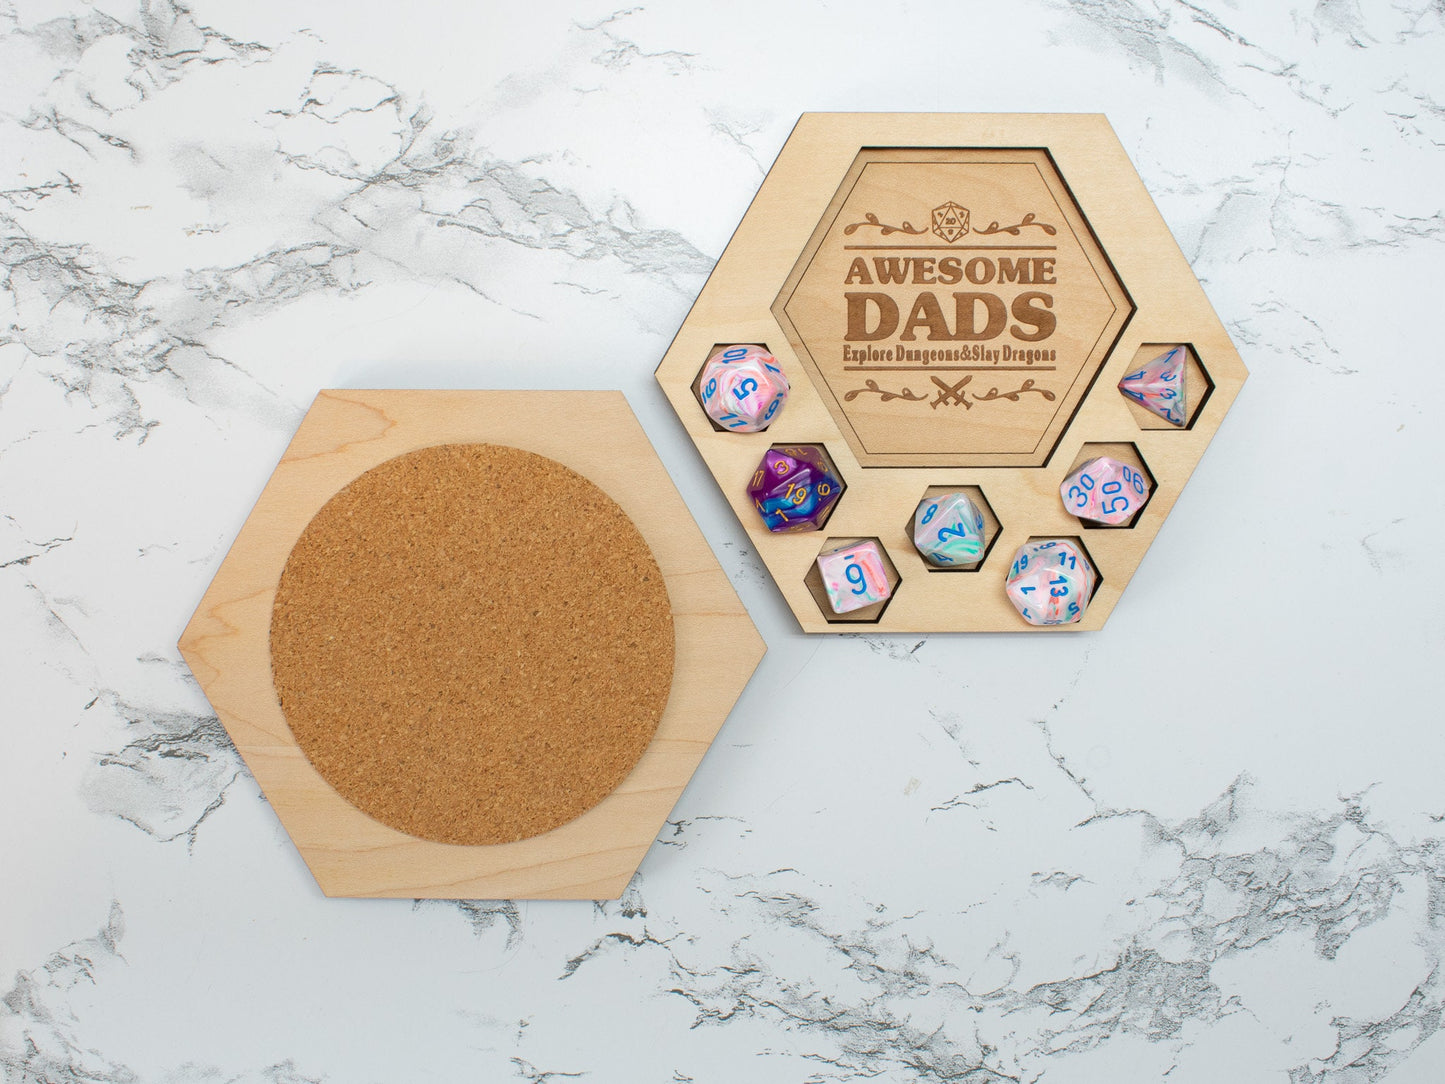 D&D Dice Tray Coasters for Mom and Dad, DnD / Pathfinder / Tabletop RPG Gaming Coasters